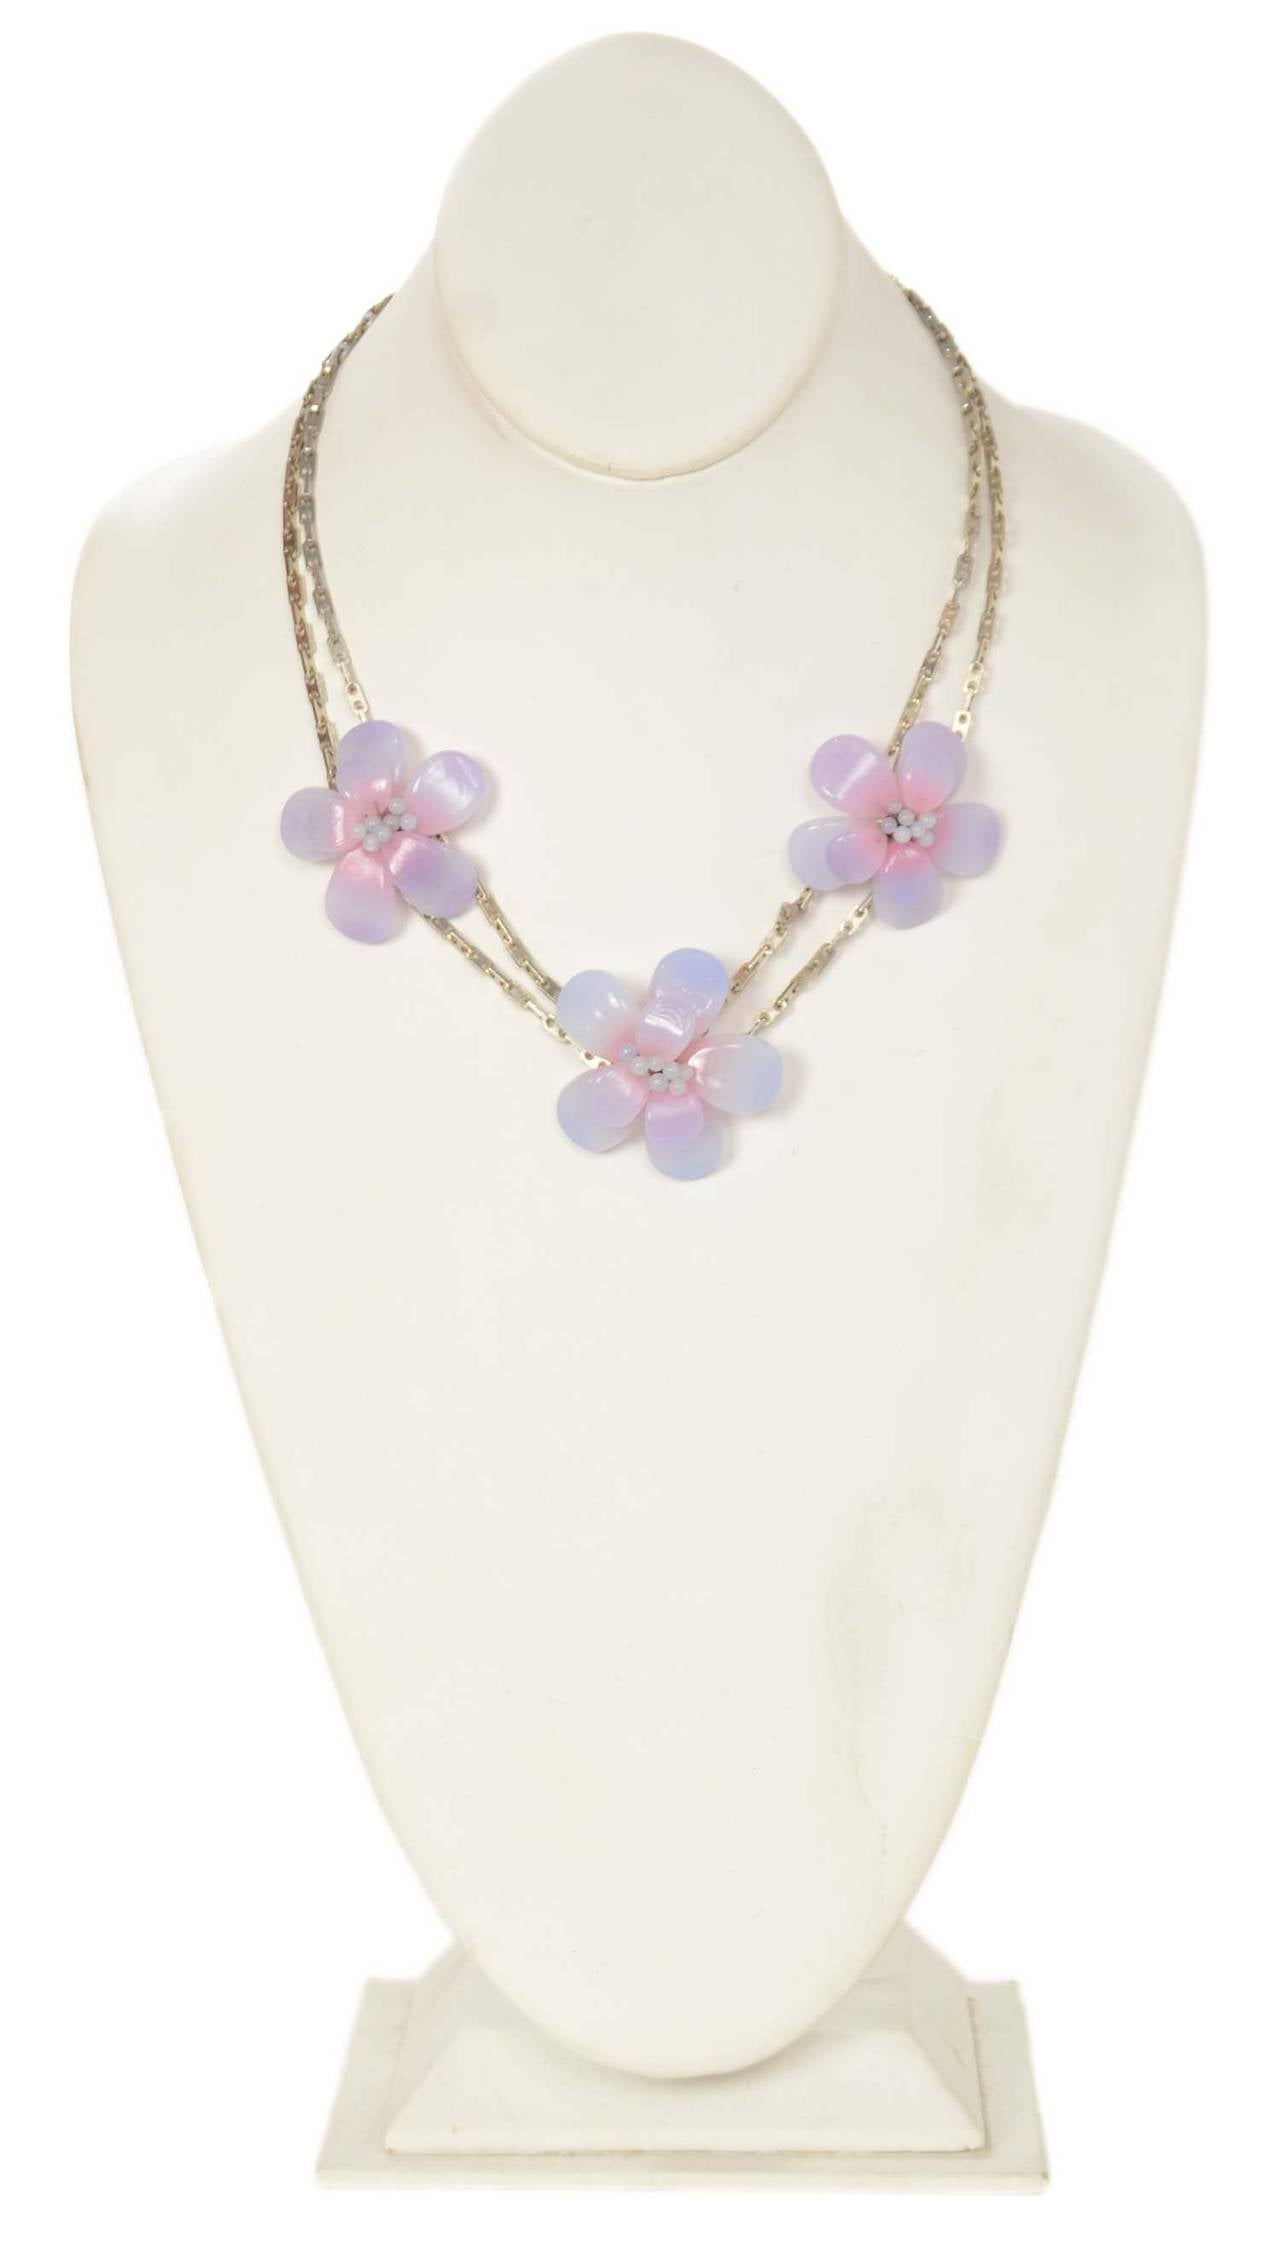 Chanel Vintage '98 Lavender Resin Camelia Flower Necklace
Features double silvertone chain

    Made in: France
    Year of Production: 1998
    Stamp: 98 CC S
    Closure: Hook and eye closure
    Color: Silvertone and gradient lavender
   